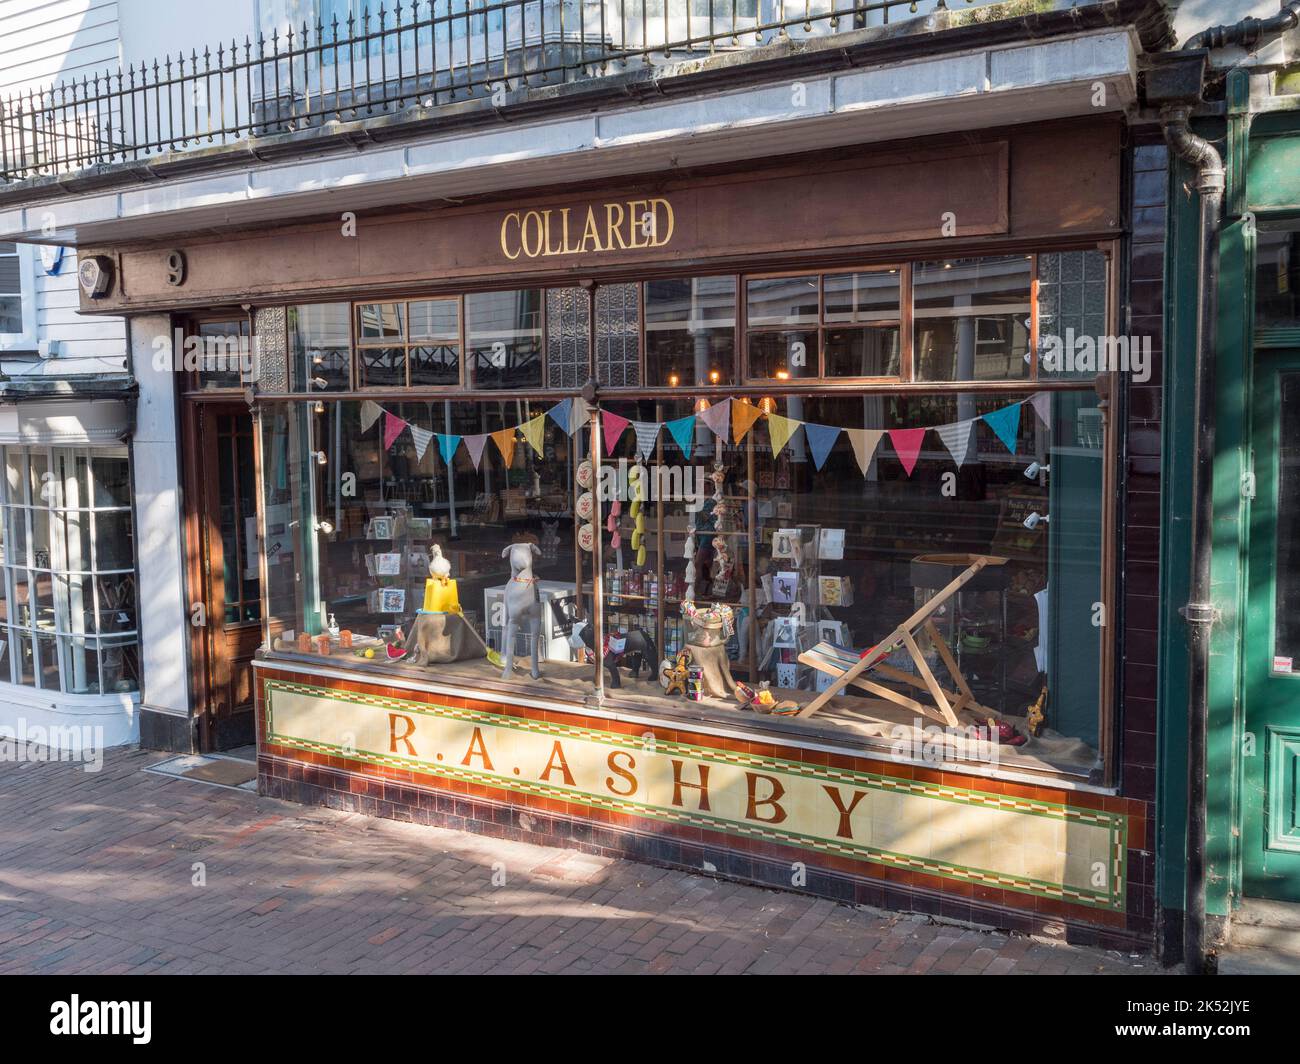 Collared, a pet supply store in the Pantiles area of Royal Tunbridge Wells, Kent, UK. Stock Photo